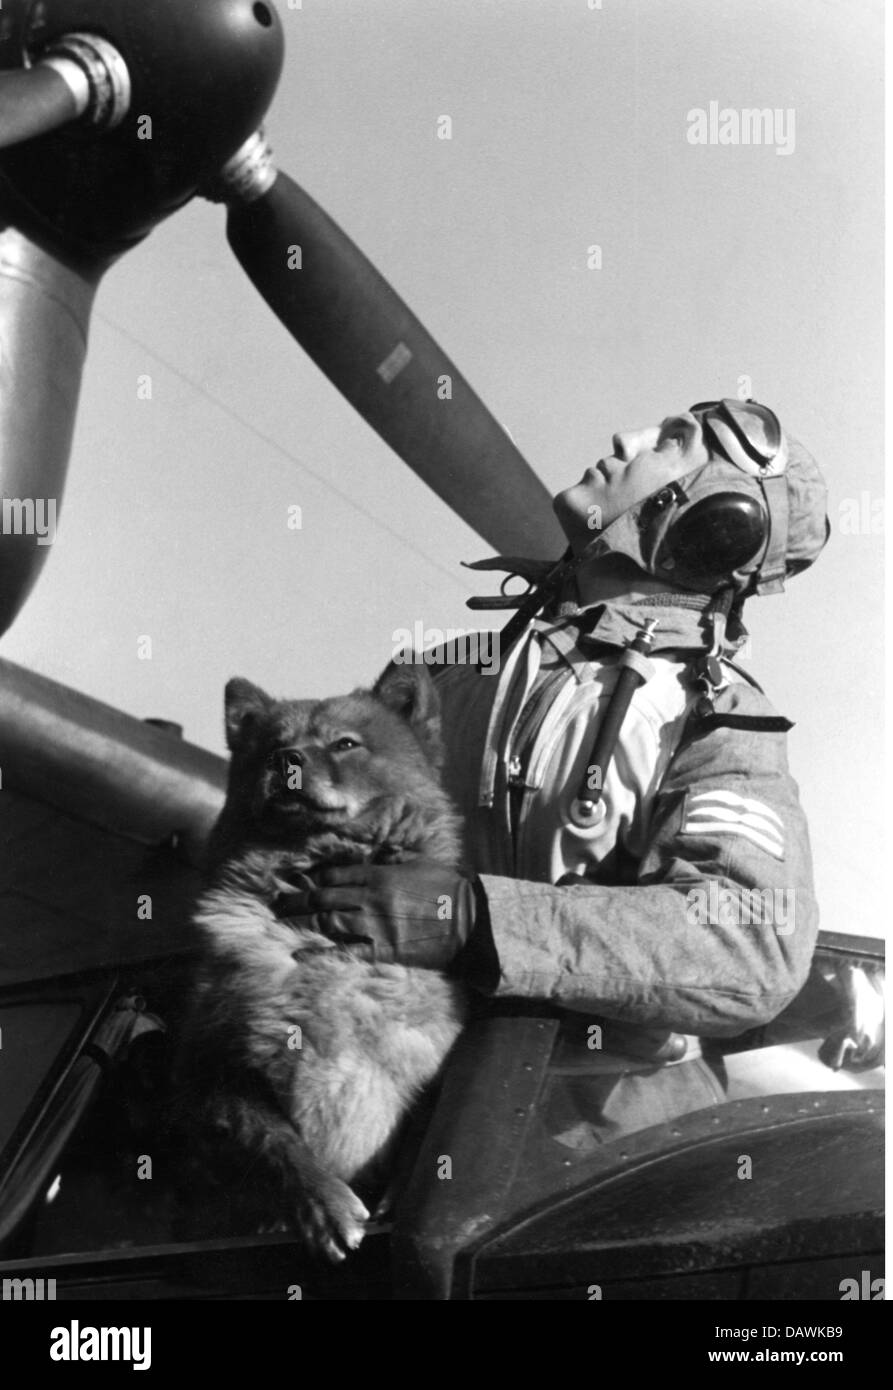 events, Second World War / WWII, aerial warfare, persons, pilot of a German flying boat with his dog before a mission, circa 1940, Germany, 20th century, maritime reconnaissance aircraft, observation, historic, historical, planes, Wehrmacht, Luftwaffe, Third Reich, recce, long-range, boats, Dornier Do 18, Do18, Do-18, aviator, aviators, pilot, soldiers, engine, propeller, airscrew, aircraft, animal, animals, 1940s, people, Additional-Rights-Clearences-Not Available Stock Photo